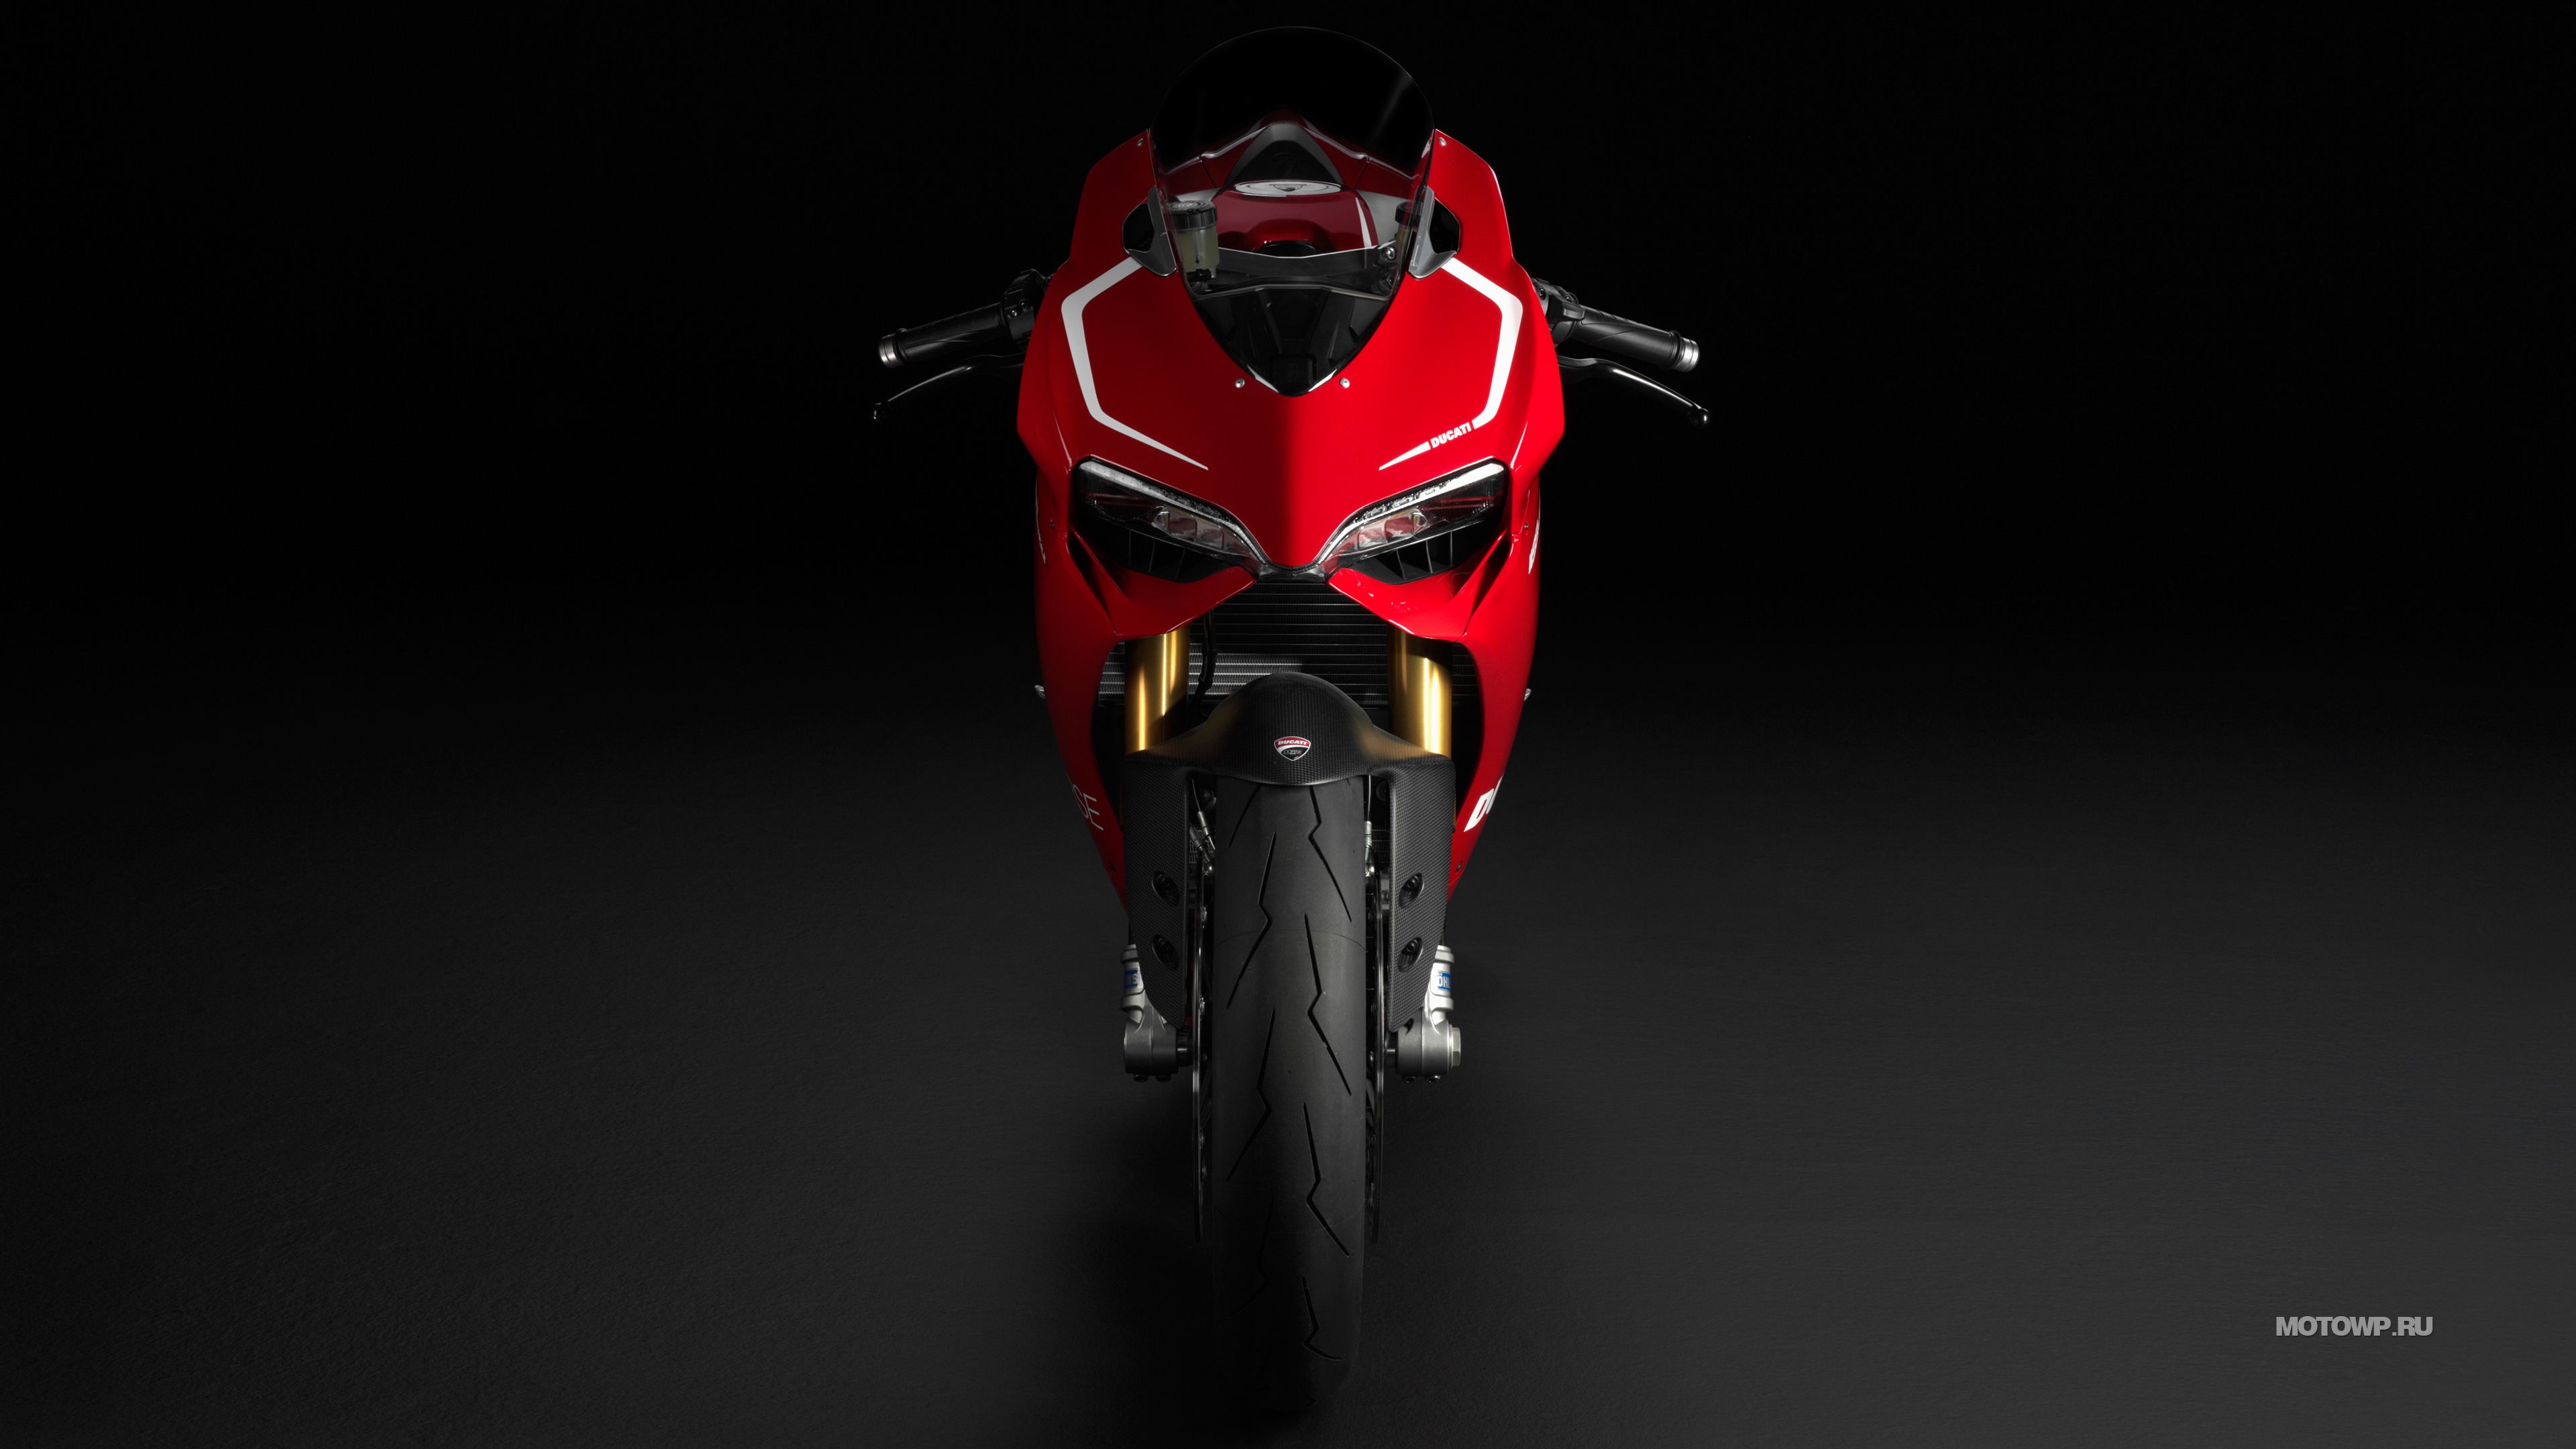 Ducati 1199 Panigale Backgrounds 4K Download 3840x2160